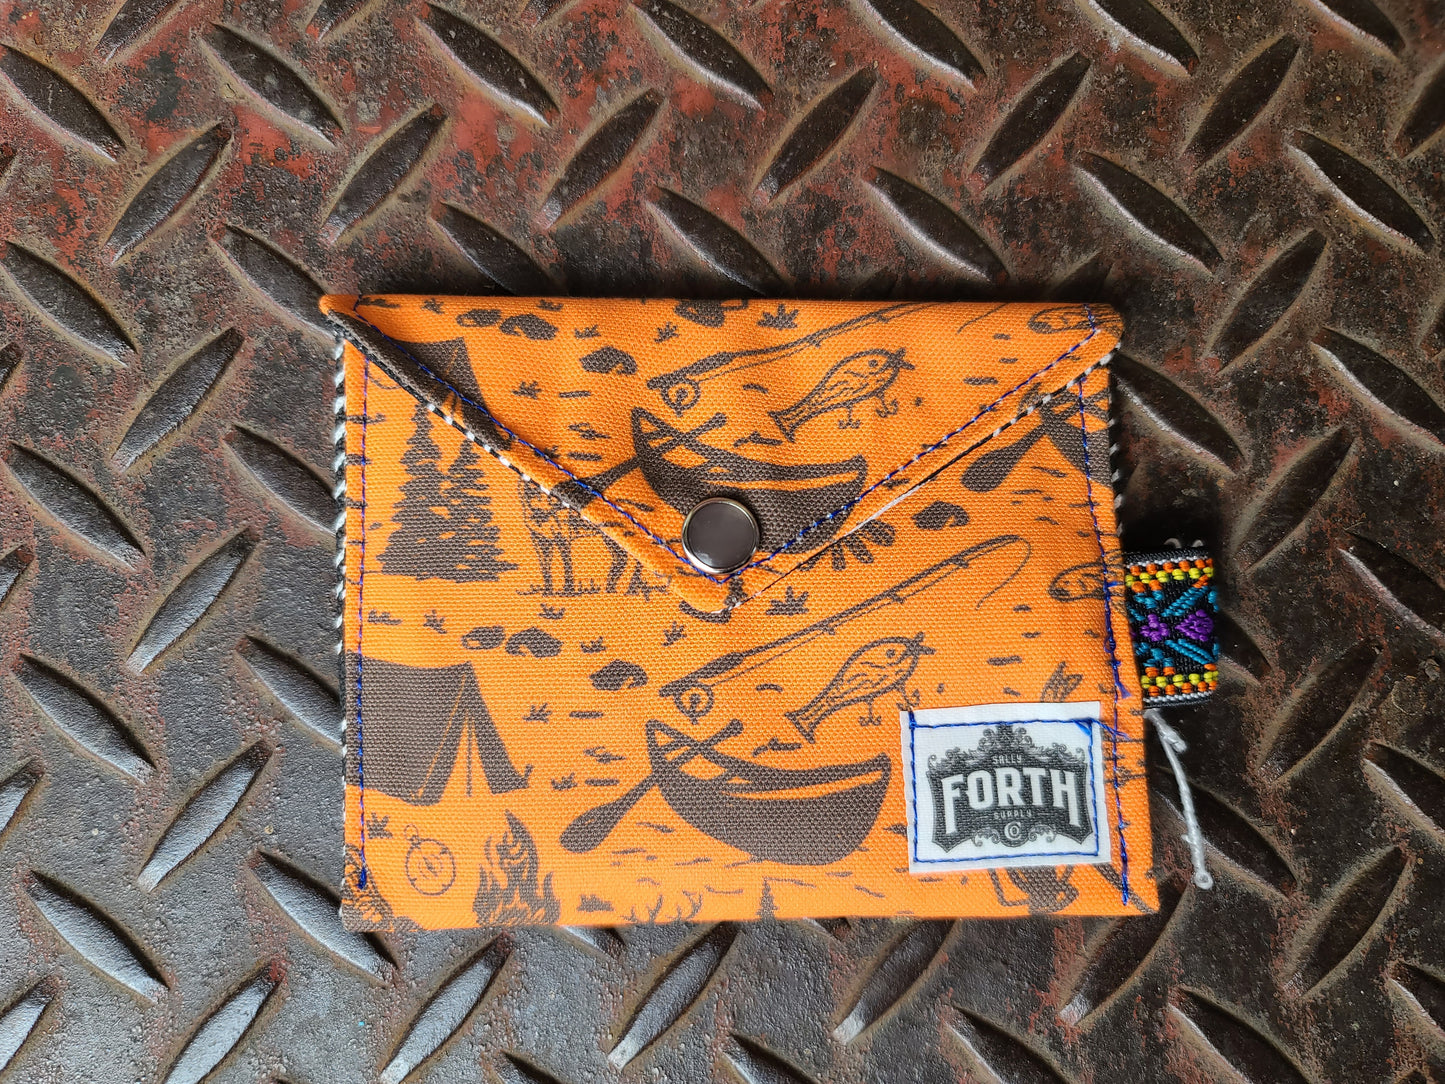 The Original Chap Stick Wallet! The Avail: Fresh Air - Sally Forth Supply Co.